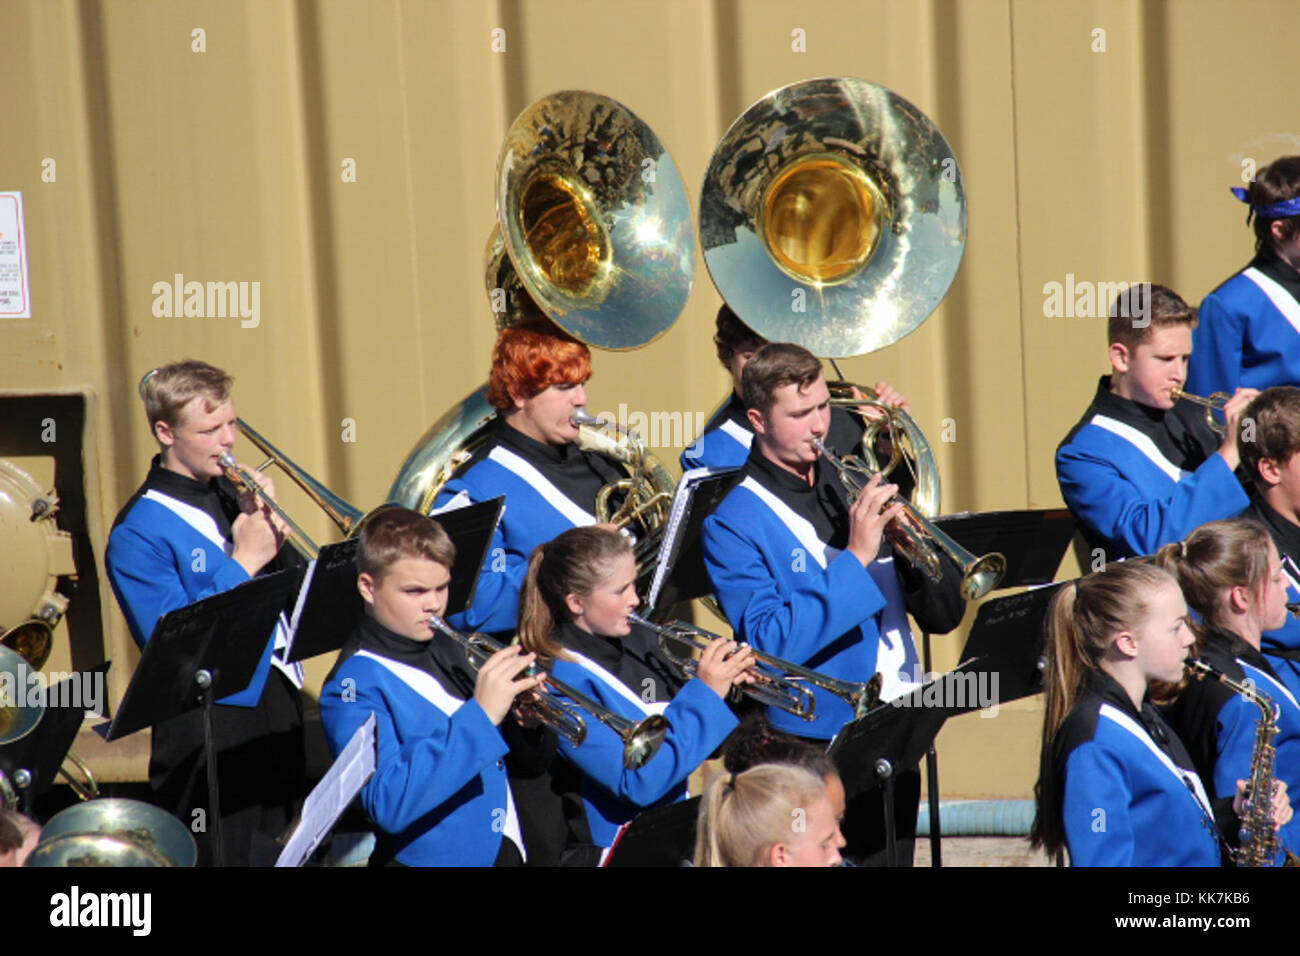 The Chimacum High School marching band kicked off the christening event with several celebratory tunes. Go Chimacum Cowboys! 29699617375 o Stock Photo